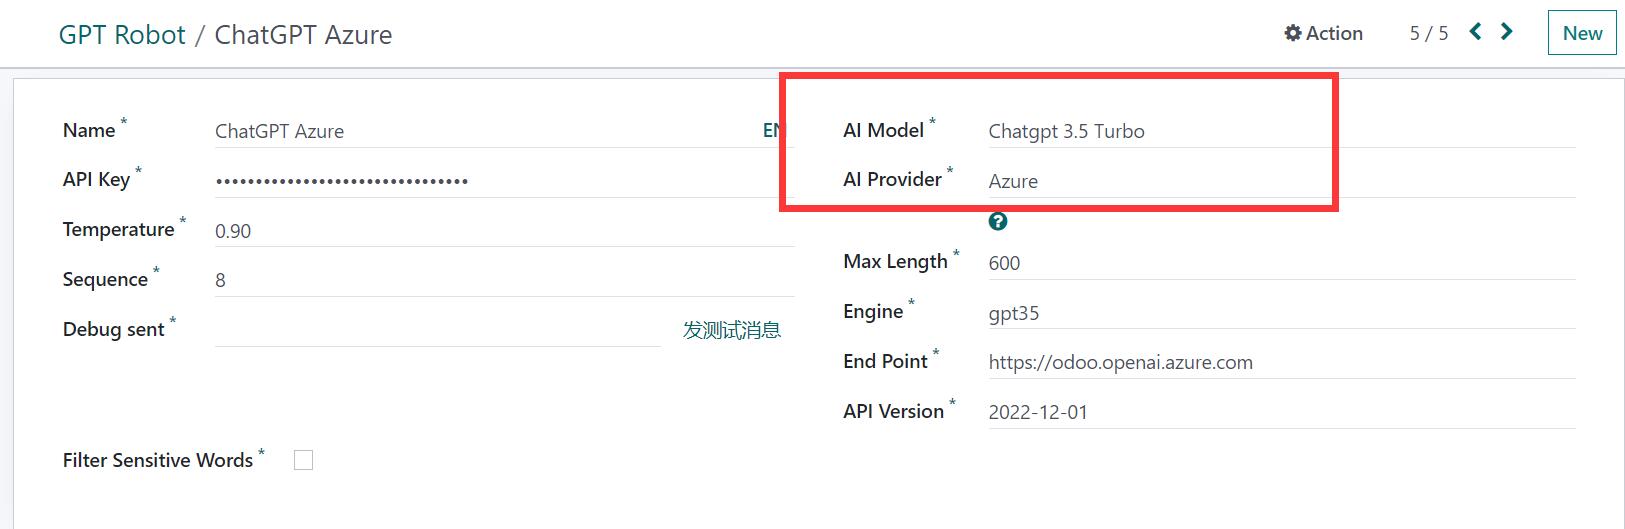  Azure openai add. It is for china and other country which no chatgpt service.